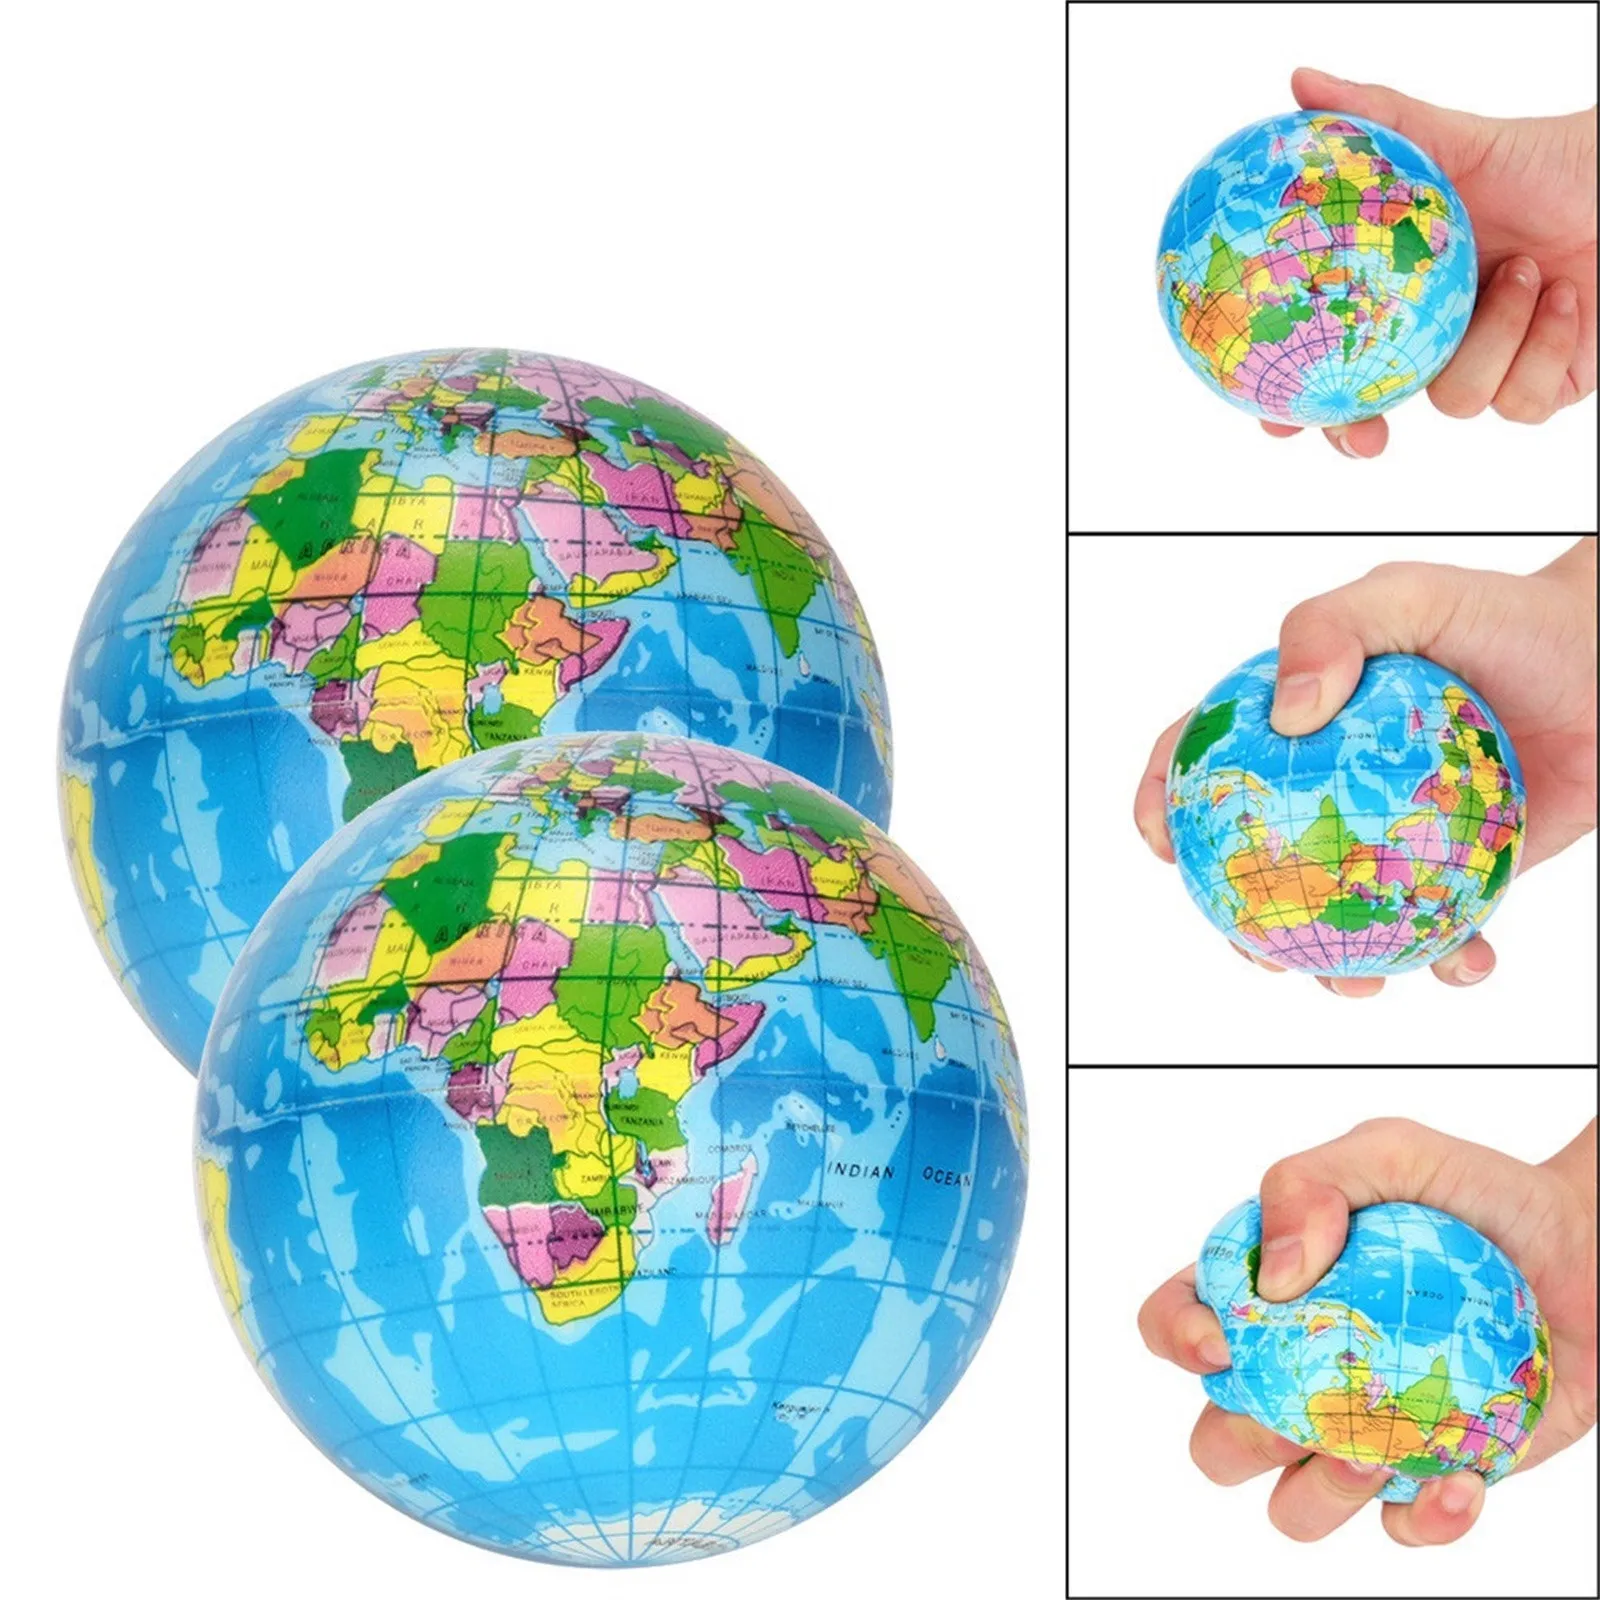 

New Stress Relief Decor World Map Foam Ball Atlas Globe Palm Planet Earth Ball squeeze toy Squishy toys for children